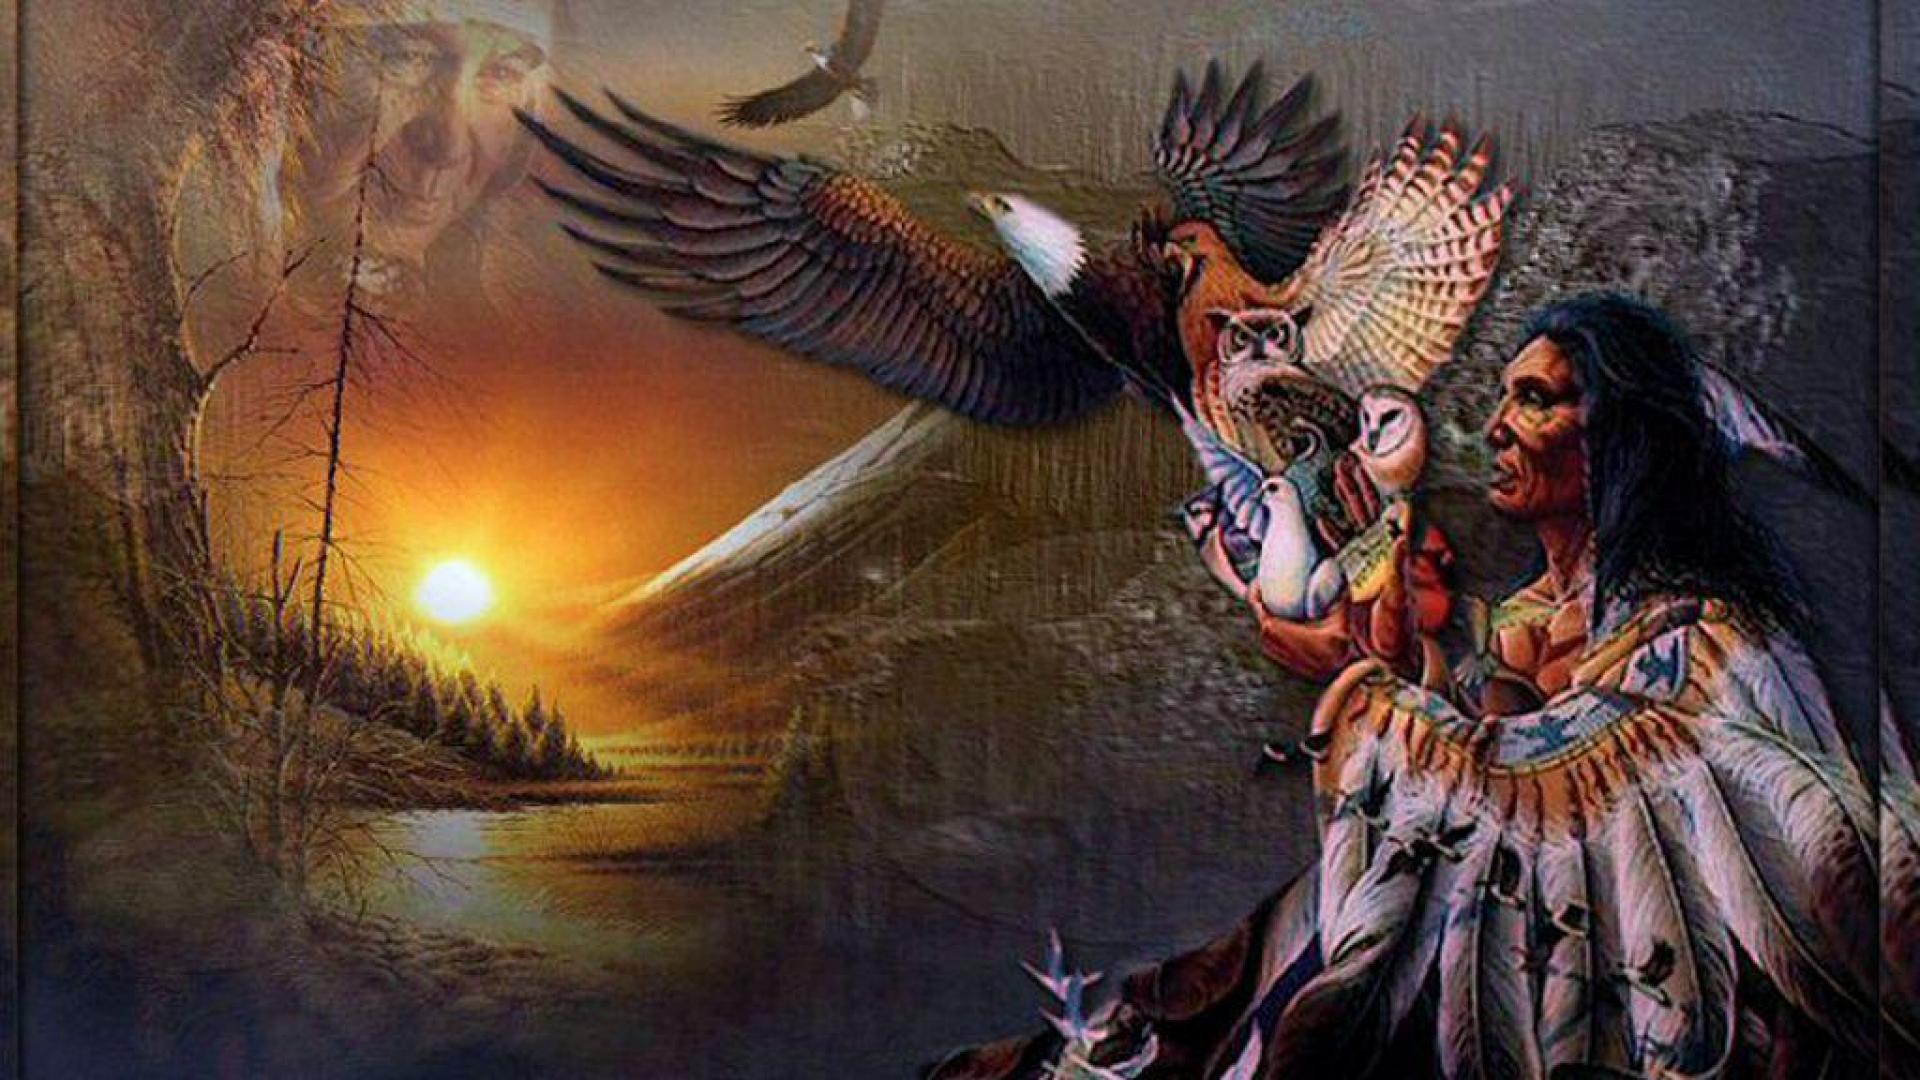 American Indian Chief Wallpaper - image #13